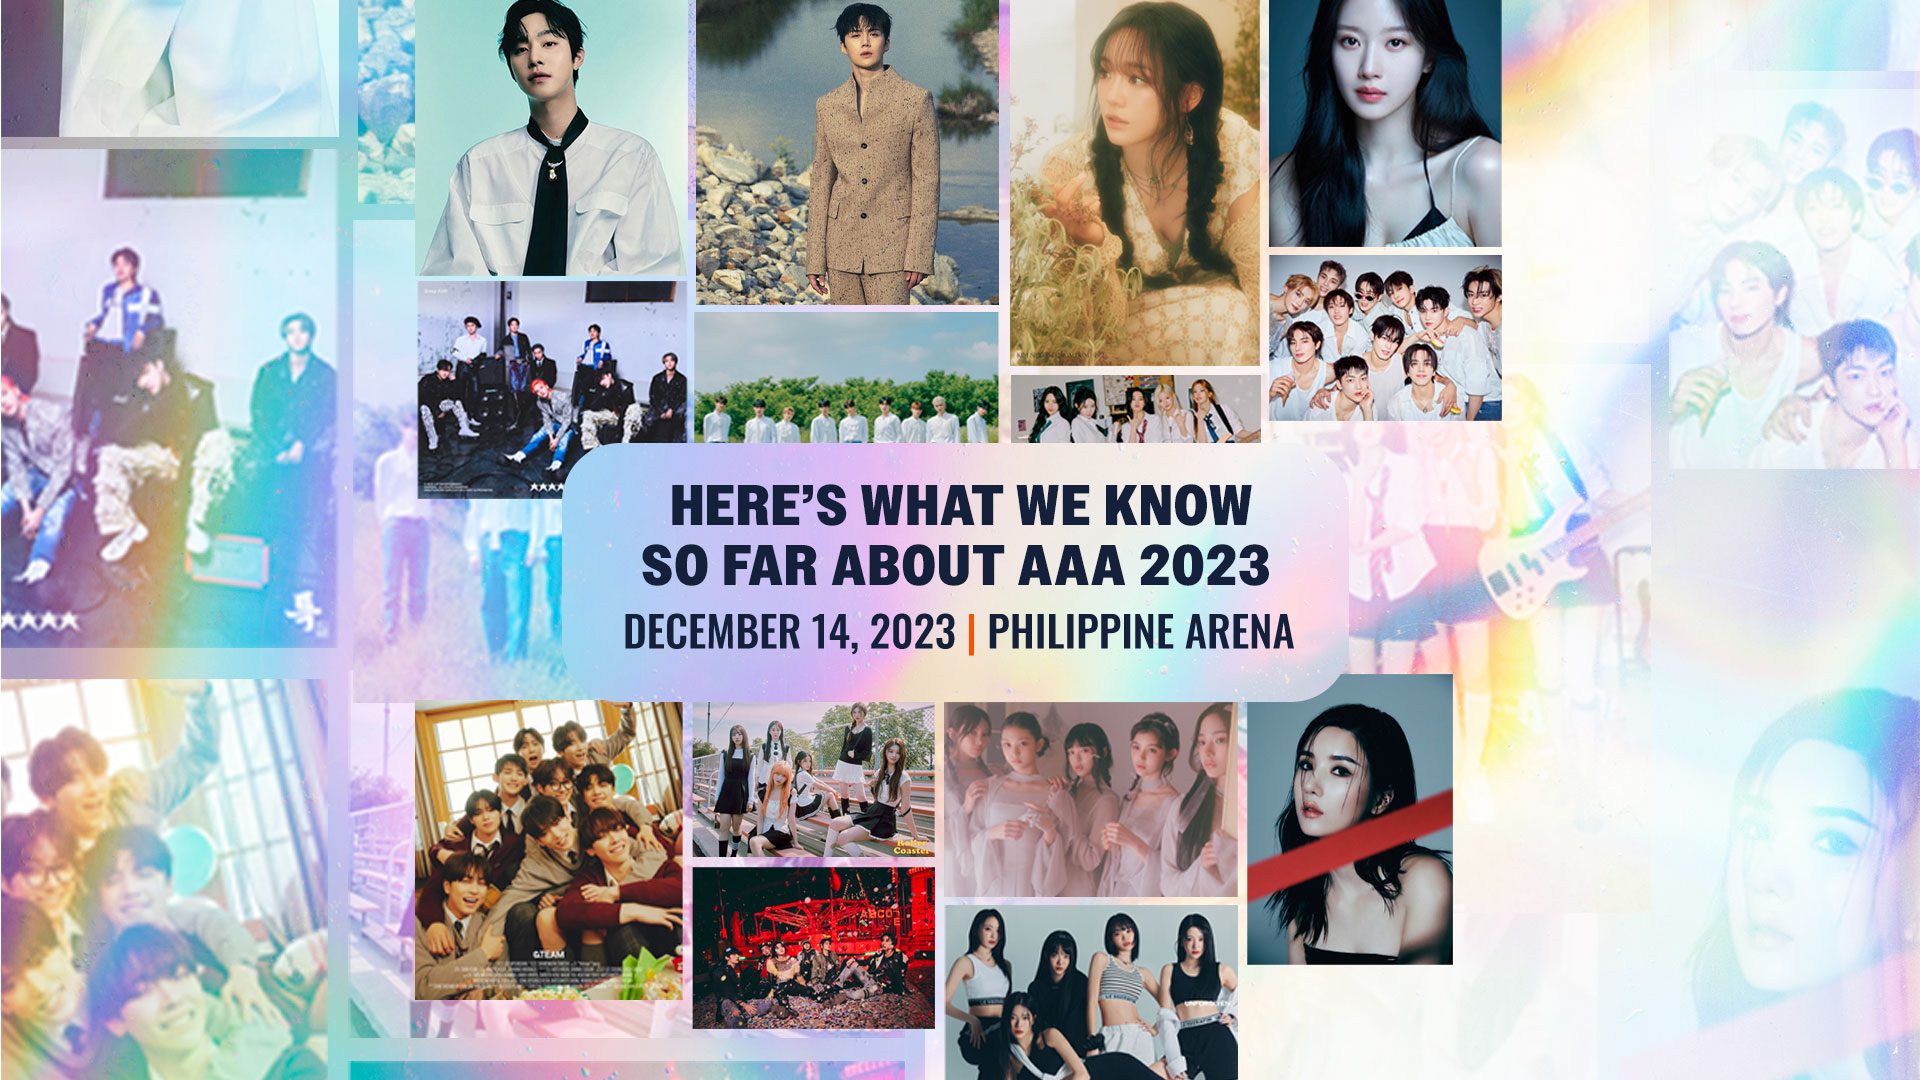 Lineup, hosts: Here’s what we know so far about AAA 2023 in PH Arena